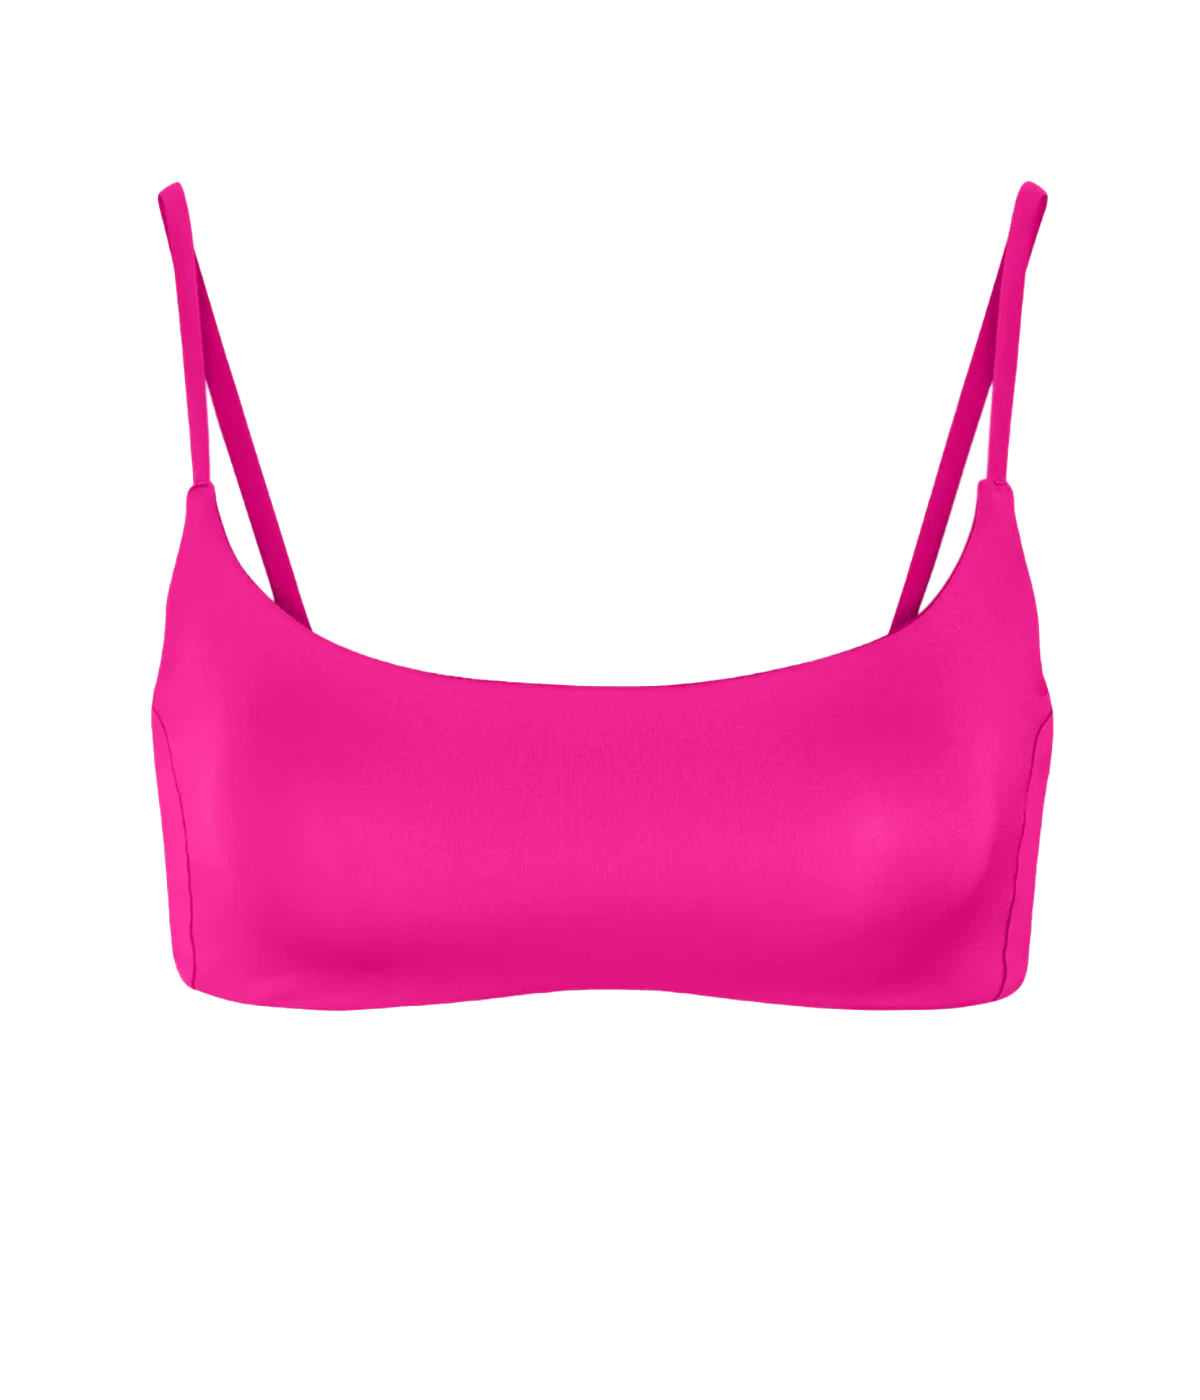 The perfect swim or surf top and bra, the Pool Days Top features a scoop front neckline for medium coverage. This hot pink bikini top is perfect for all bust sizes and double lined for a more flattering fit. 